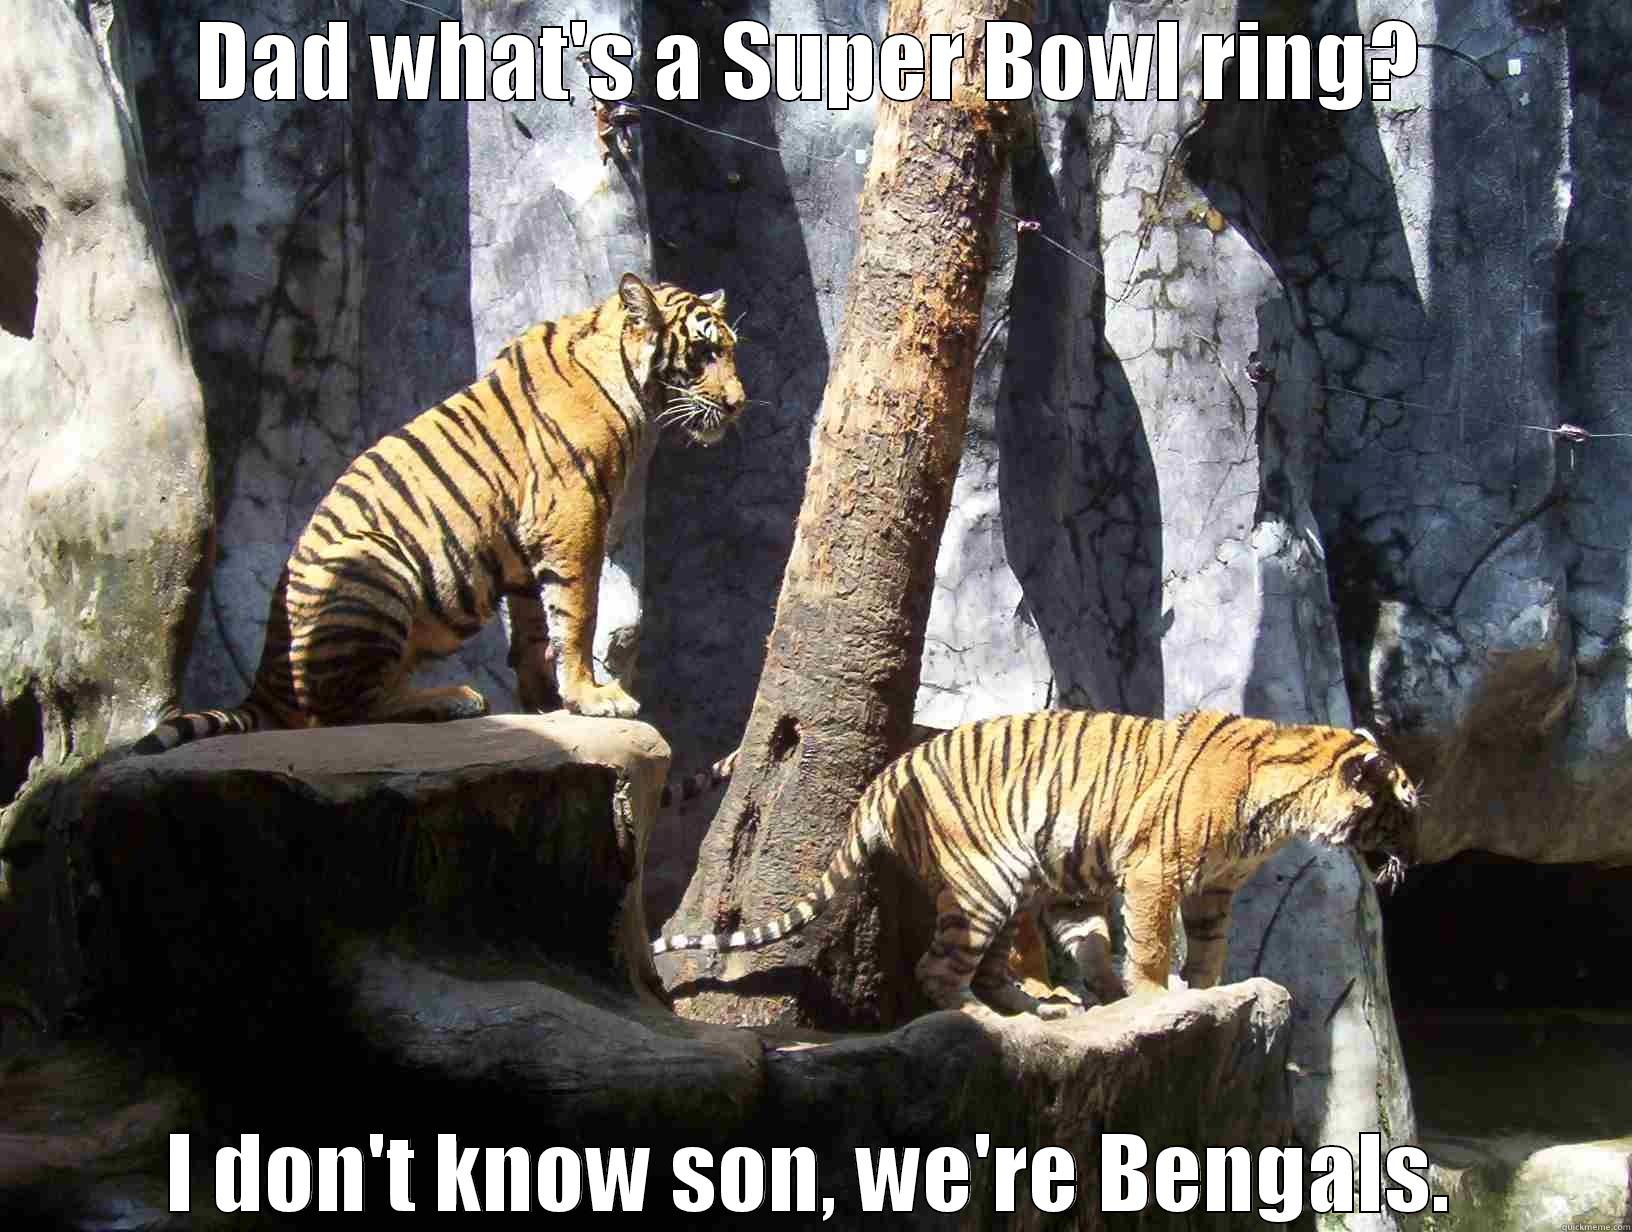 DAD WHAT'S A SUPER BOWL RING? I DON'T KNOW SON, WE'RE BENGALS. Misc